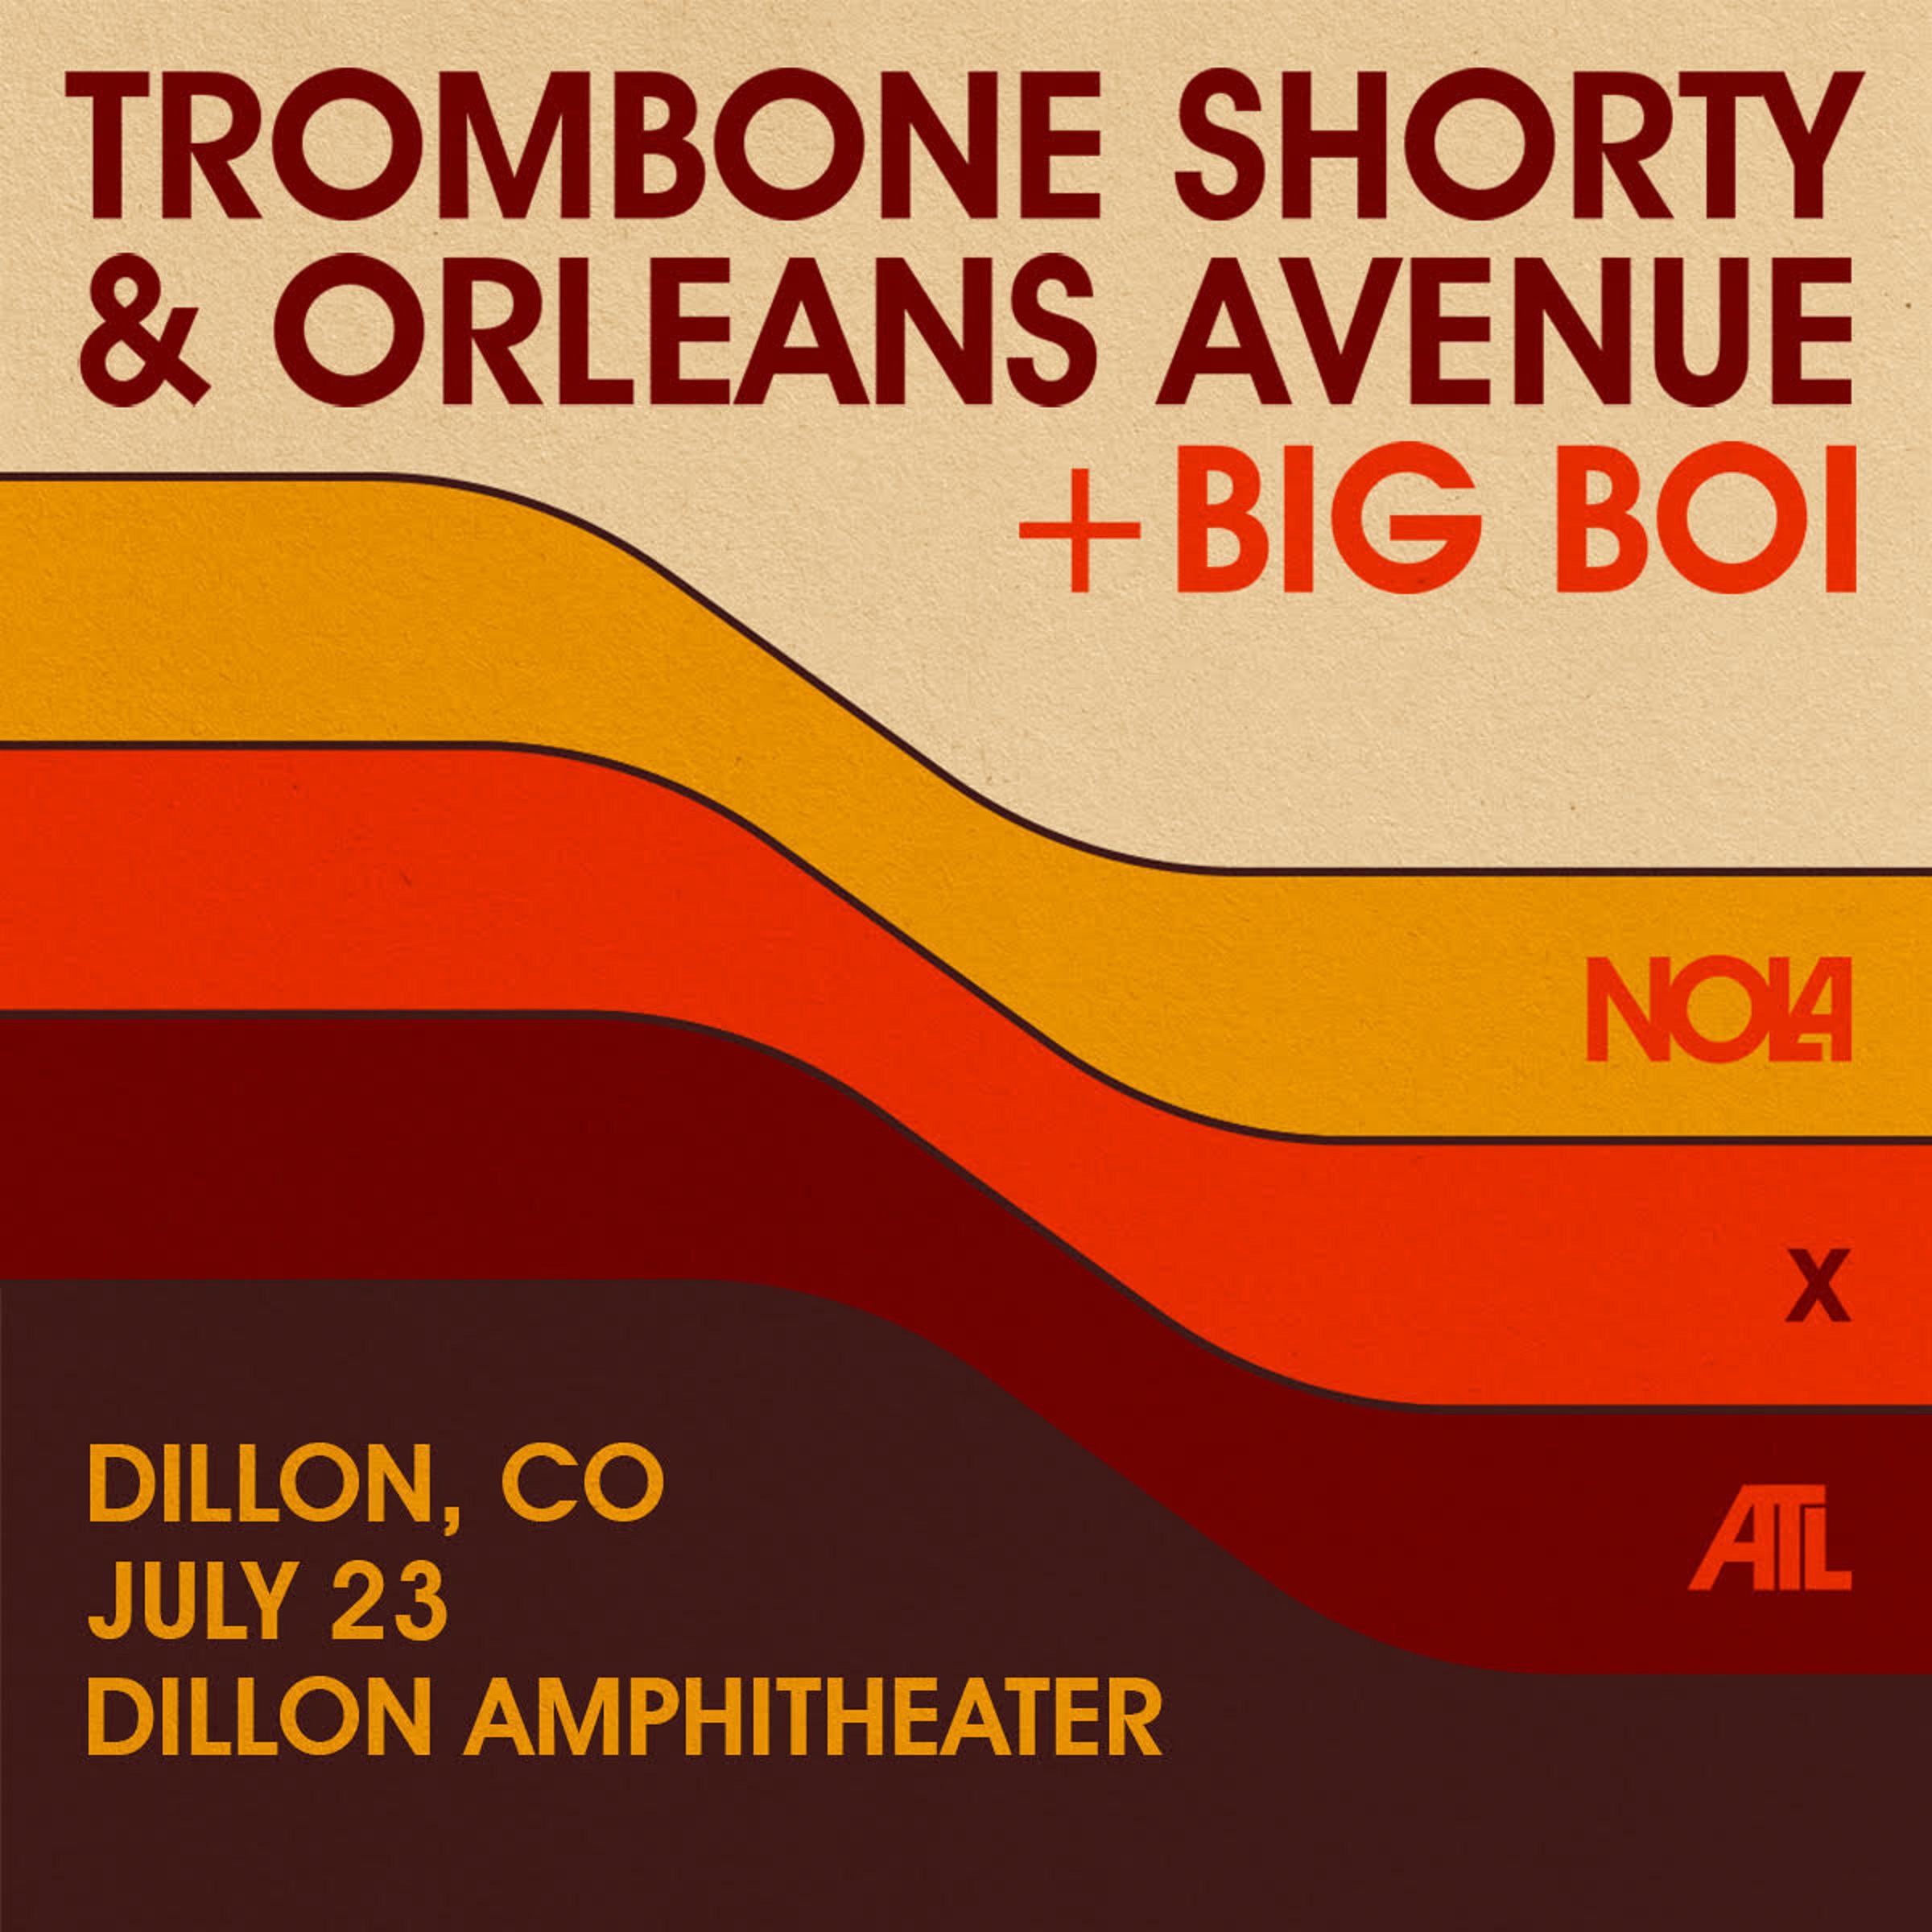 AEG Presents: Trombone Shorty & Orleans Avenue Live with Opener Big Boi at Dillon Amphitheater